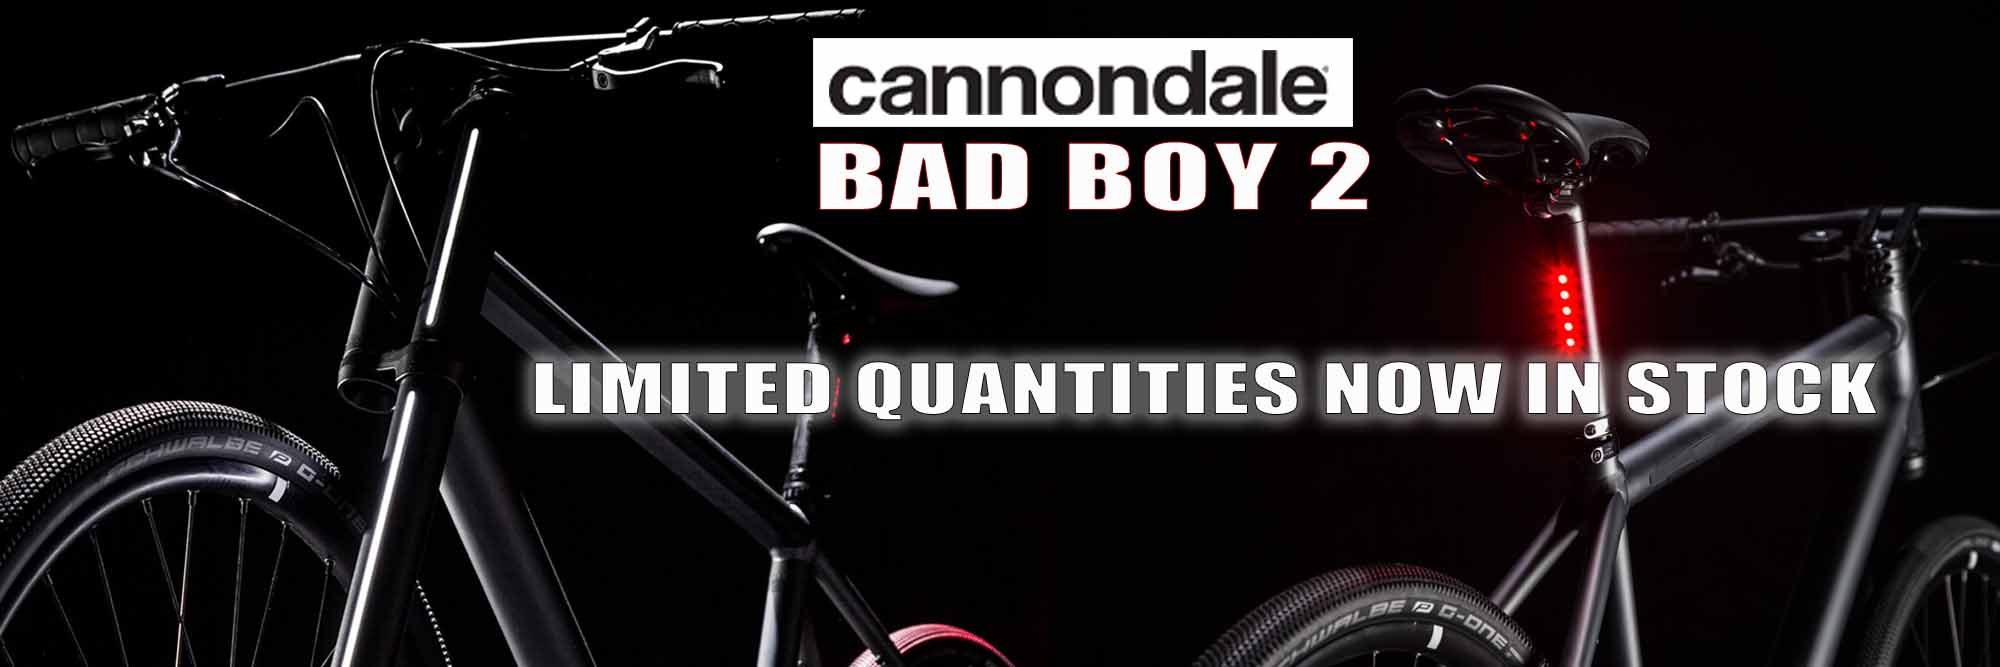 Limited number of Cannondale Bad Boy 2 bikes in-stock now